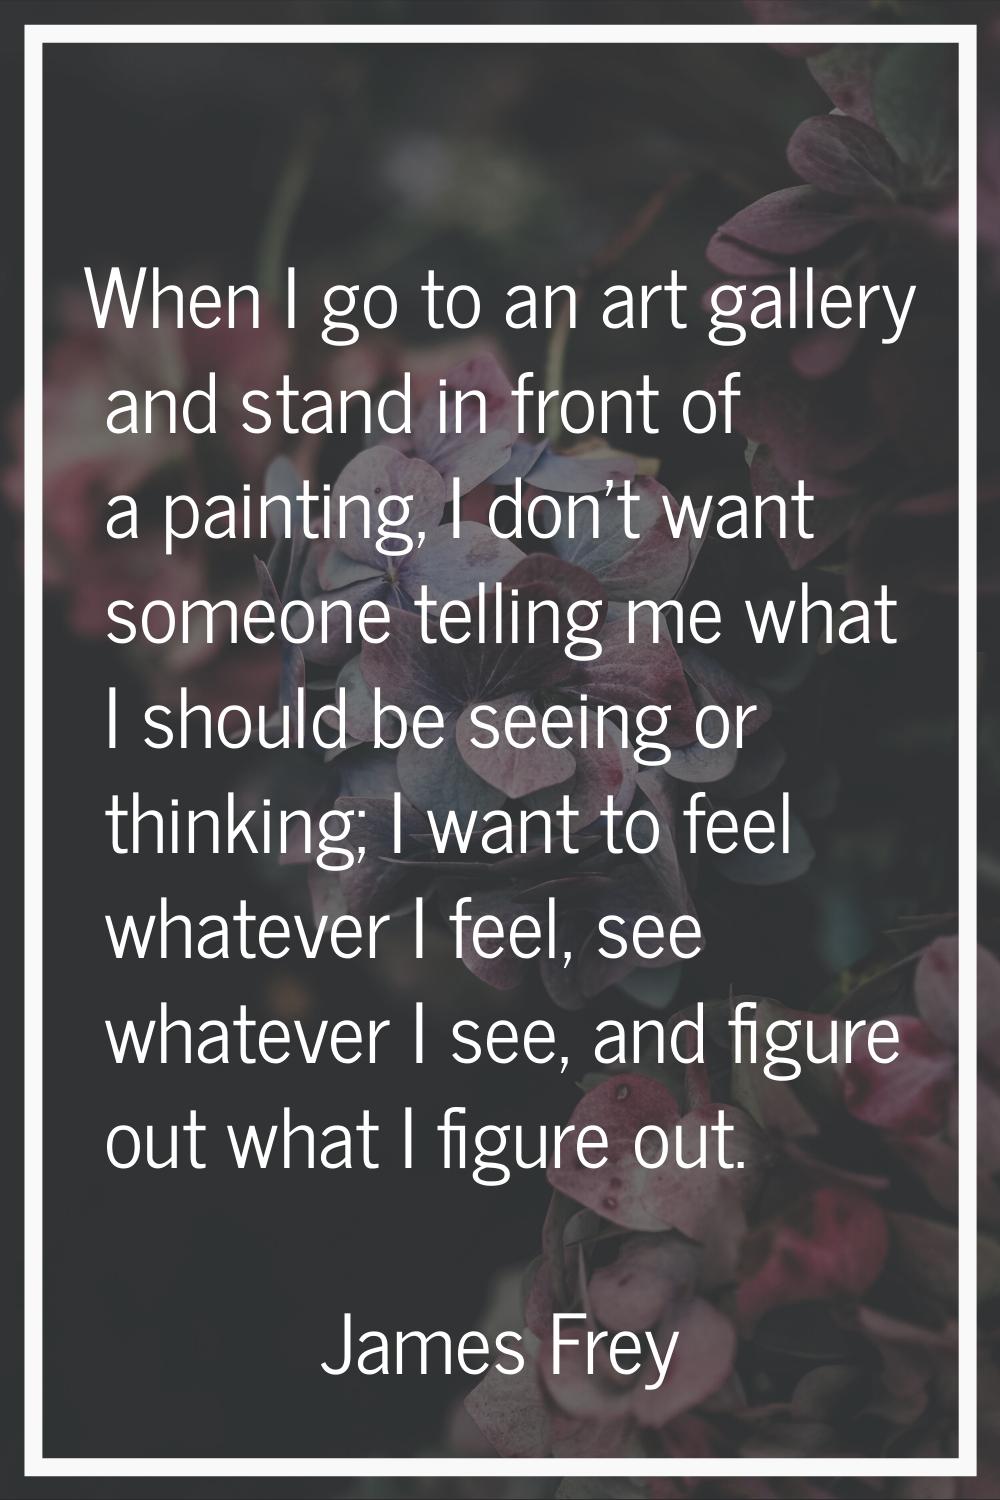 When I go to an art gallery and stand in front of a painting, I don't want someone telling me what 